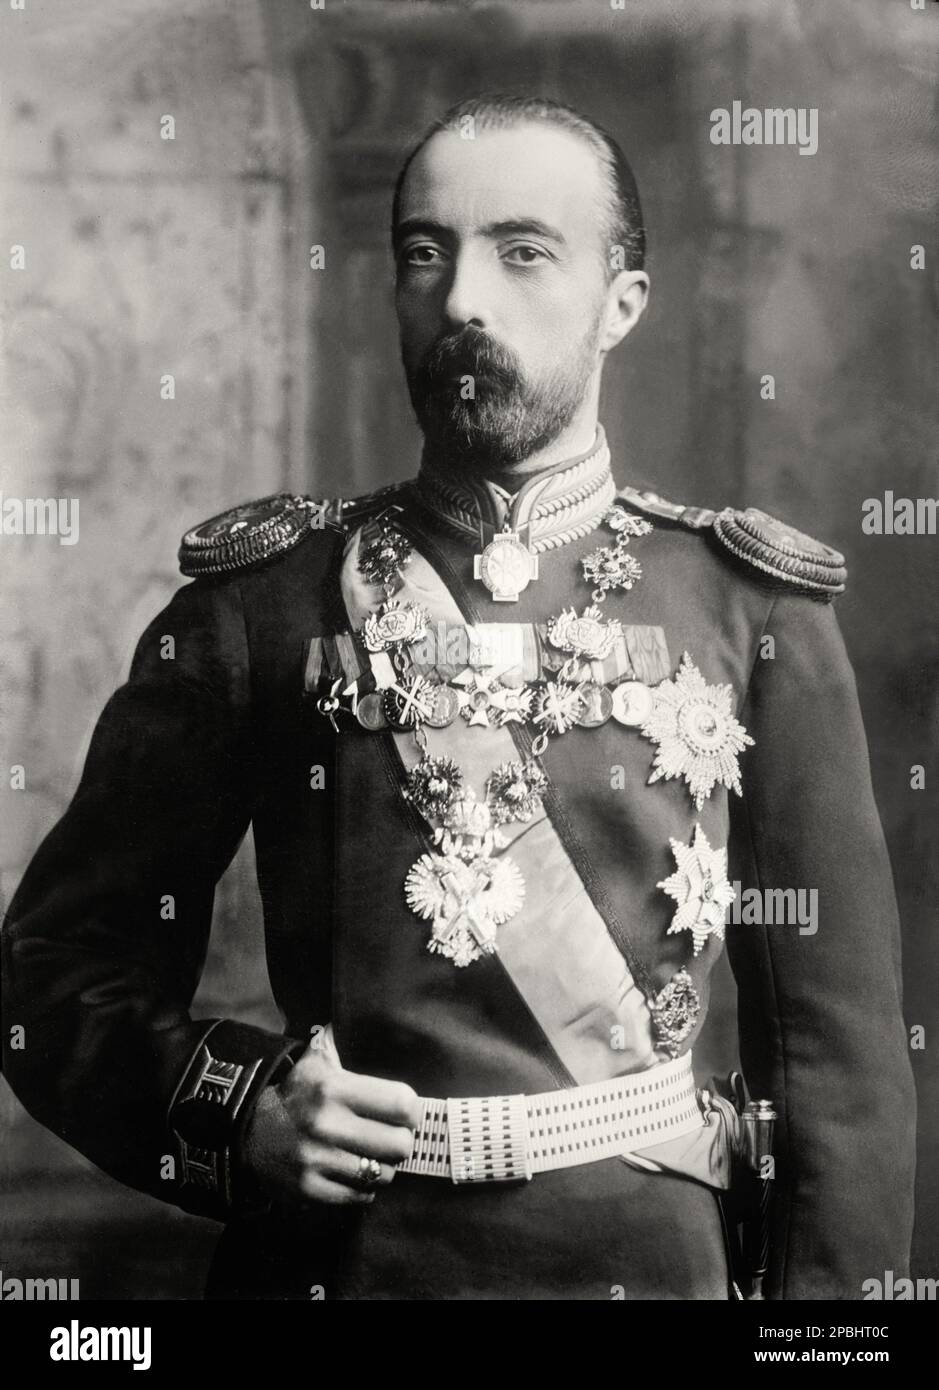 1918 ca : The russian Grand Duke Michael of Russia ( Mikhail Aleksandrovich Romanov , 1878 - 1918 ), was the younger brother of Tsar Nicholas II of Russia. Nicholas abdicated in favour of Michael on March 15 1917, but the next day Michael deferred acceptance of the throne. Michael was a son of Alexander III of Russia and Dagmar of Denmark. His paternal grandparents were Alexander II of Russia and his first wife Marie of Hesse and by Rhine. His maternal grandparents were Christian IX of Denmark and Louise of Hesse-Kassel (or Hesse-Cassel). Michael was a younger brother of Nicholas II of Russia, Stock Photo